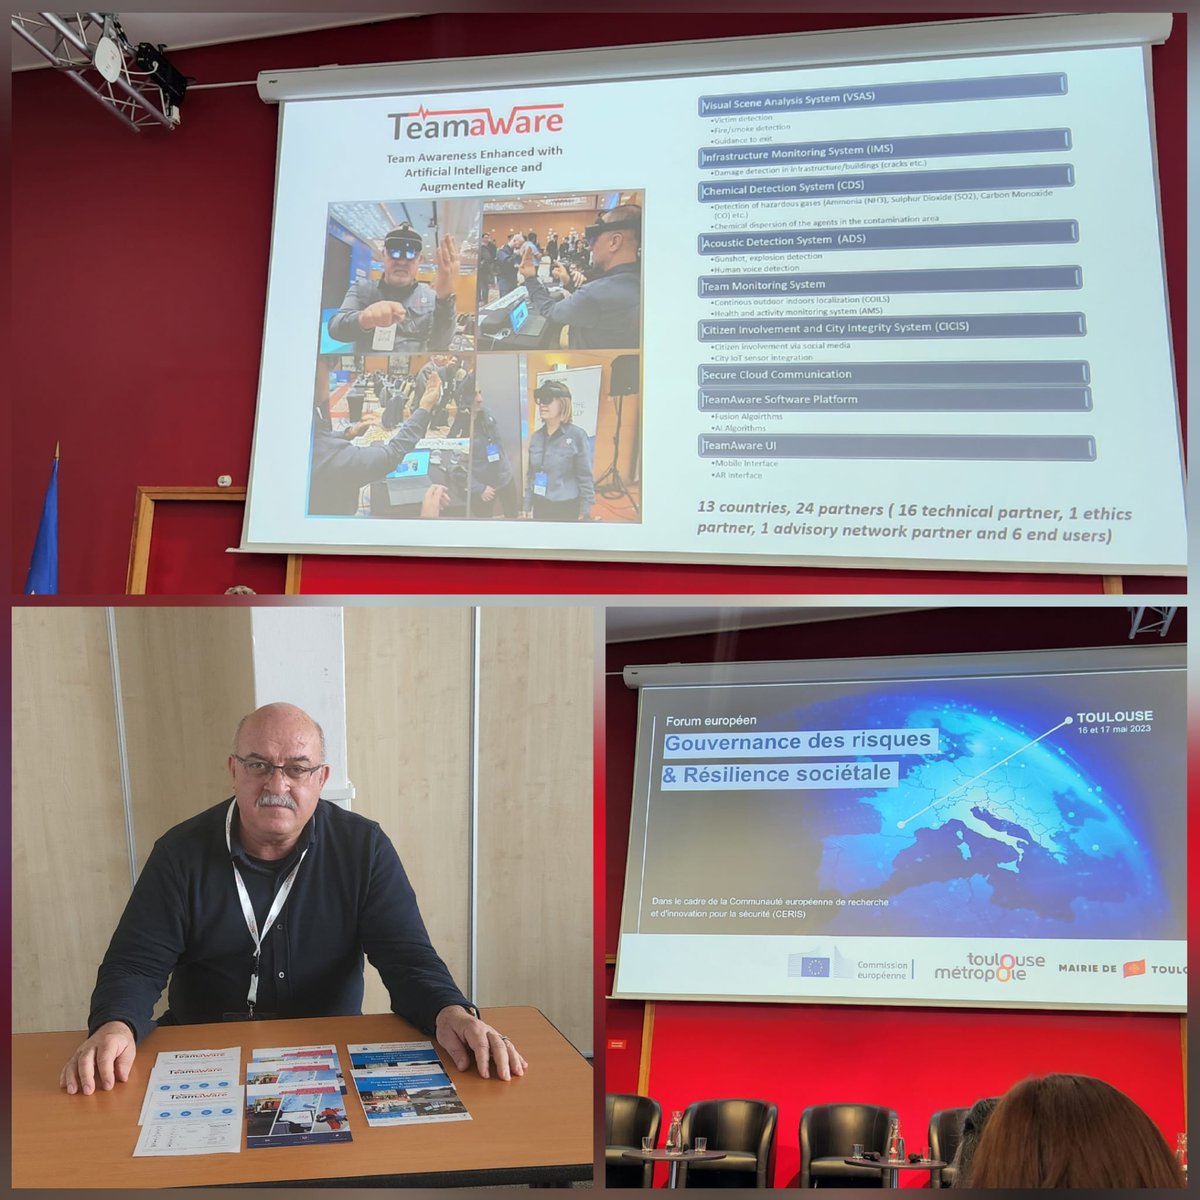 We presented the @TeamAware_EU project at the European Forum on Risk Governance and Social Resilience, an event organized within the framework of CERIS. We talked about how to solve the problems experienced in the earthquake in Türkiye.#Havelsan @aahdorgtr #Toulouse #DRS